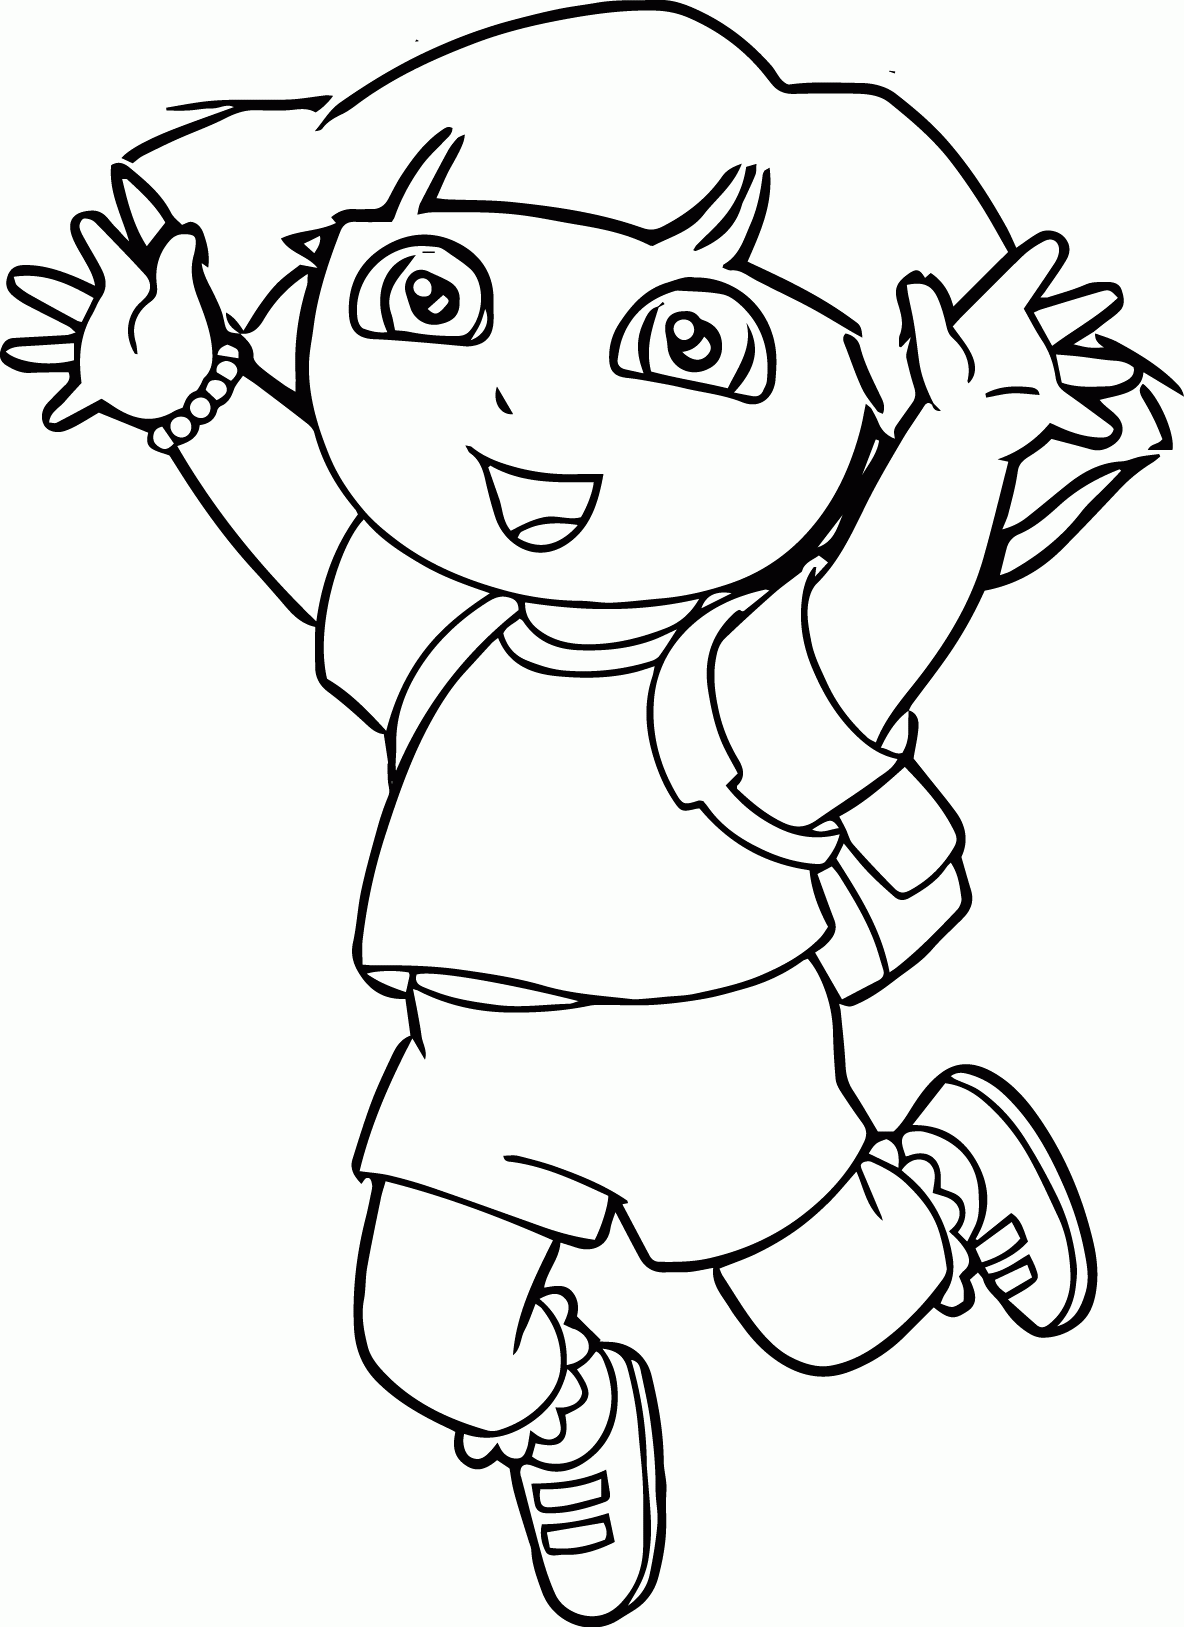 Dora_image_cut_out_jump_coloring_page | Wecoloringpage